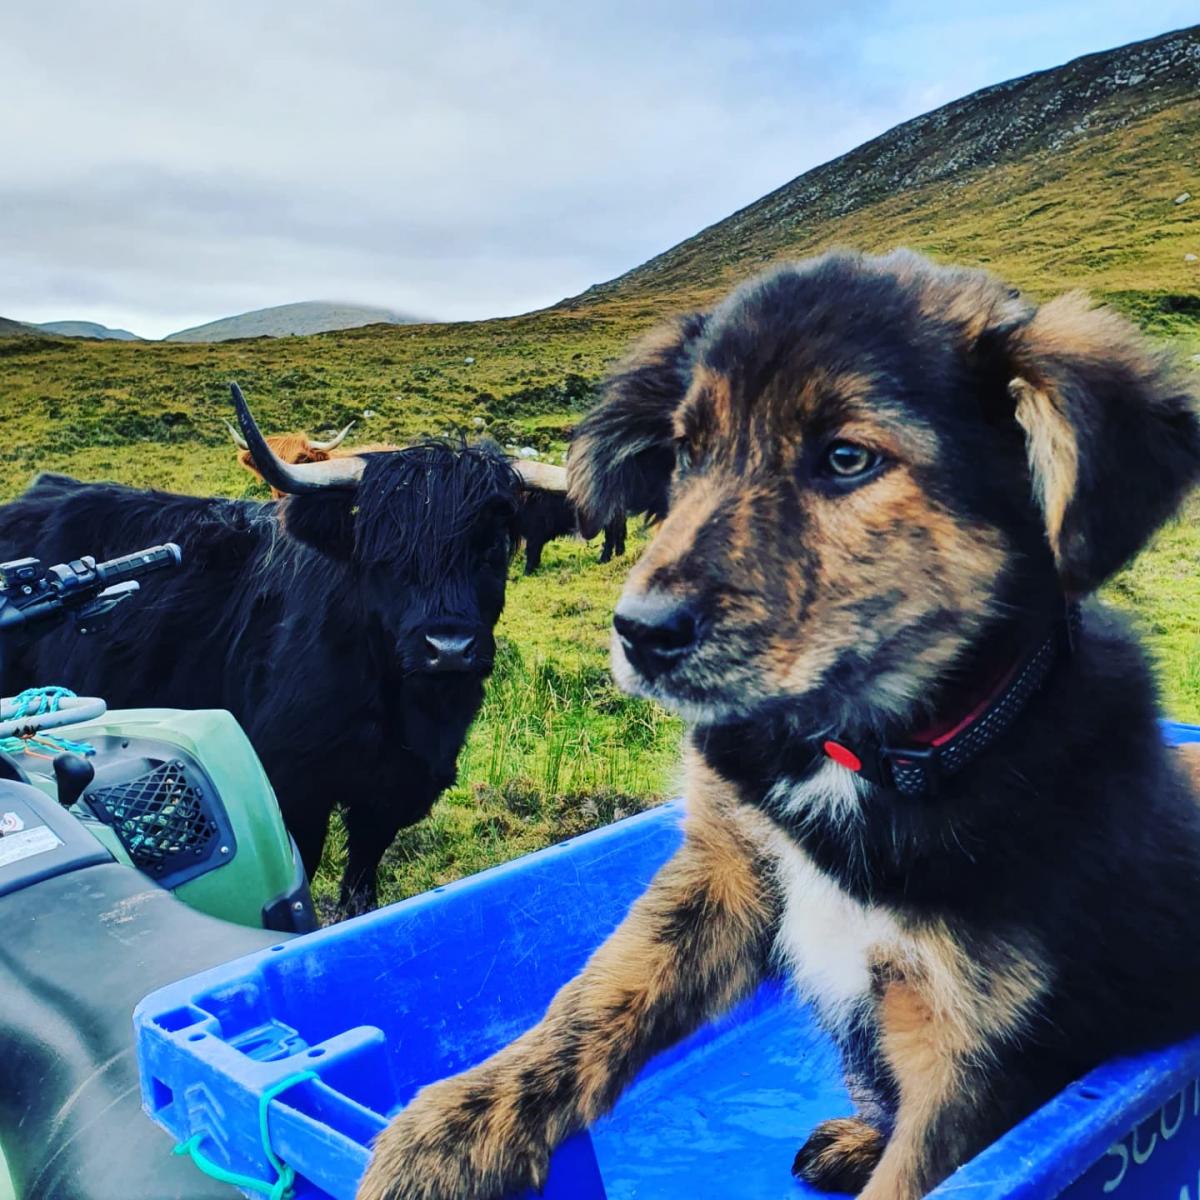 Shona Bertin - This is Finn our New Zealand Huntaway meeting our Highland Cows for the first time on the Isle of Harris